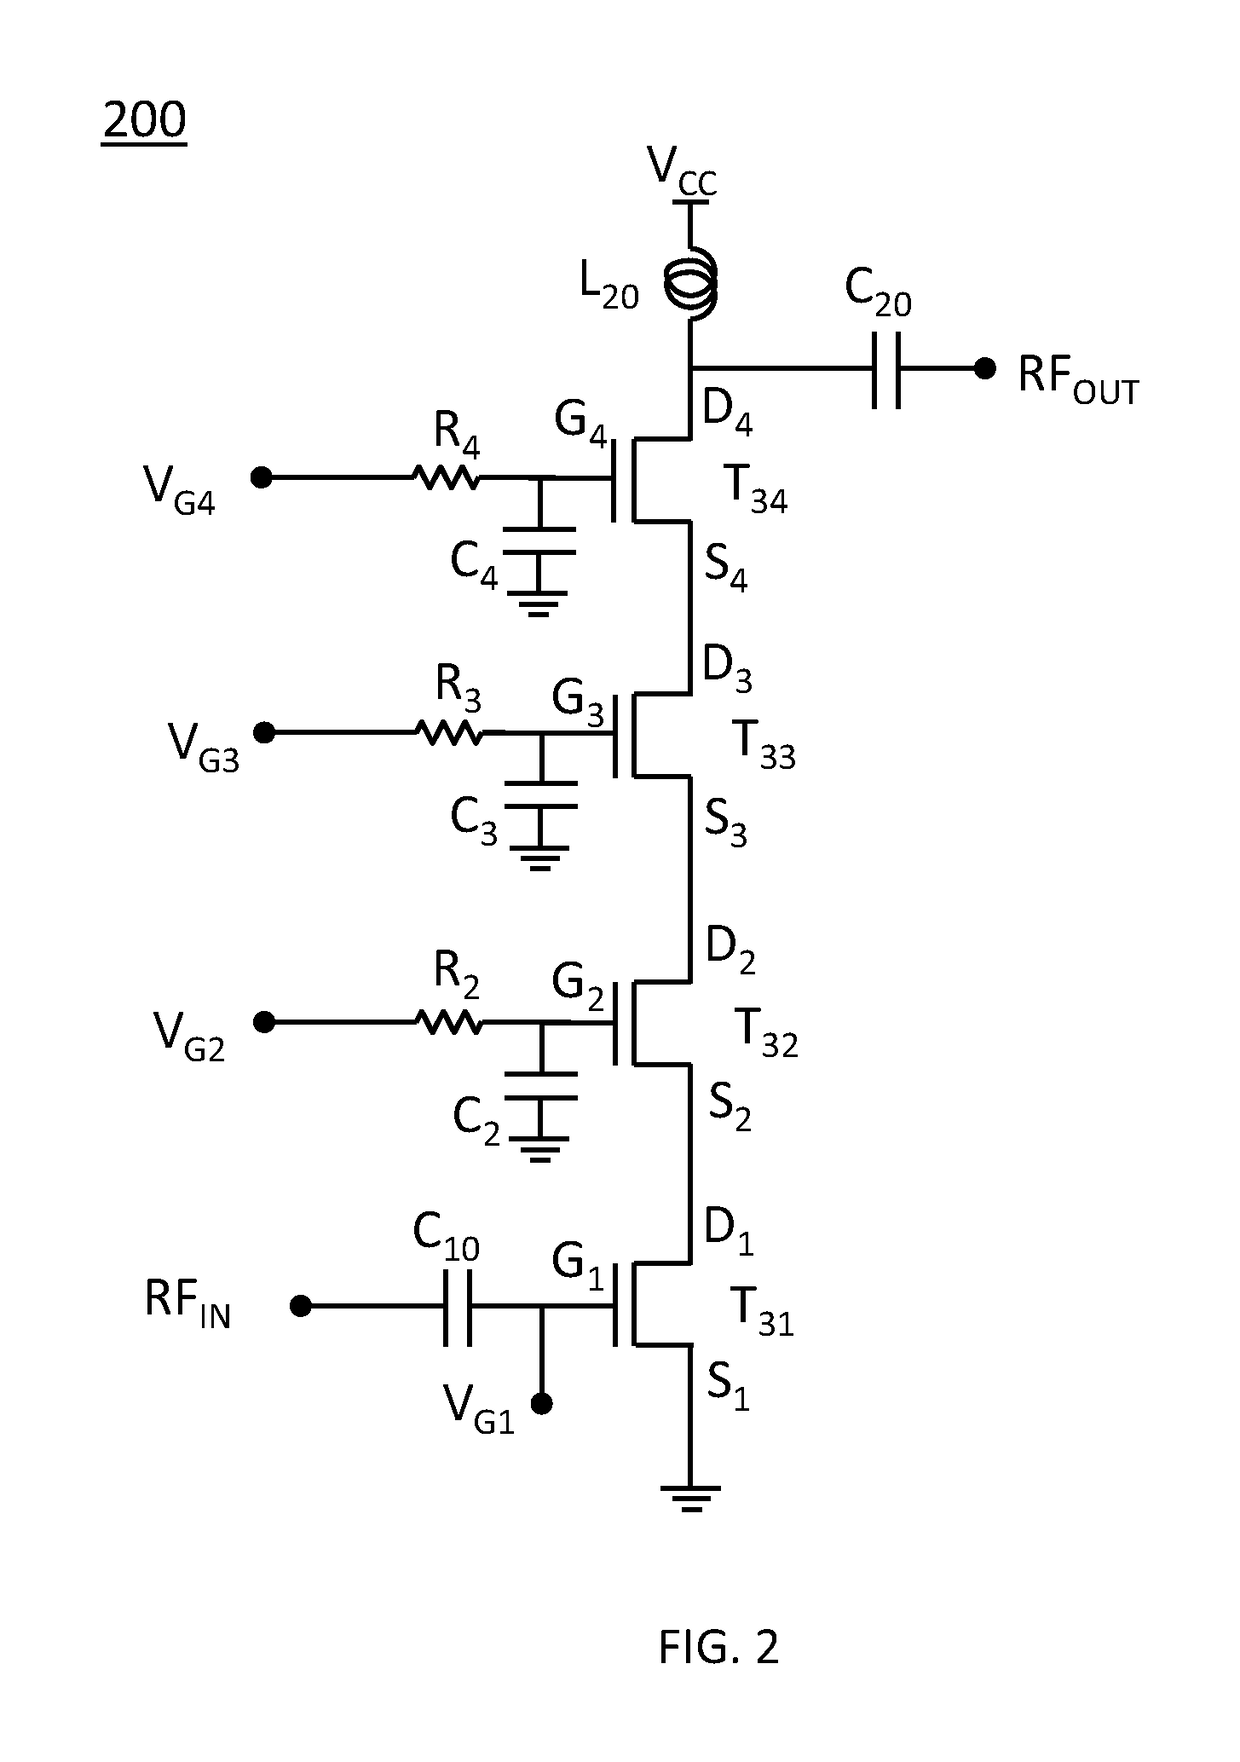 Body tie optimization for stacked transistor amplifier